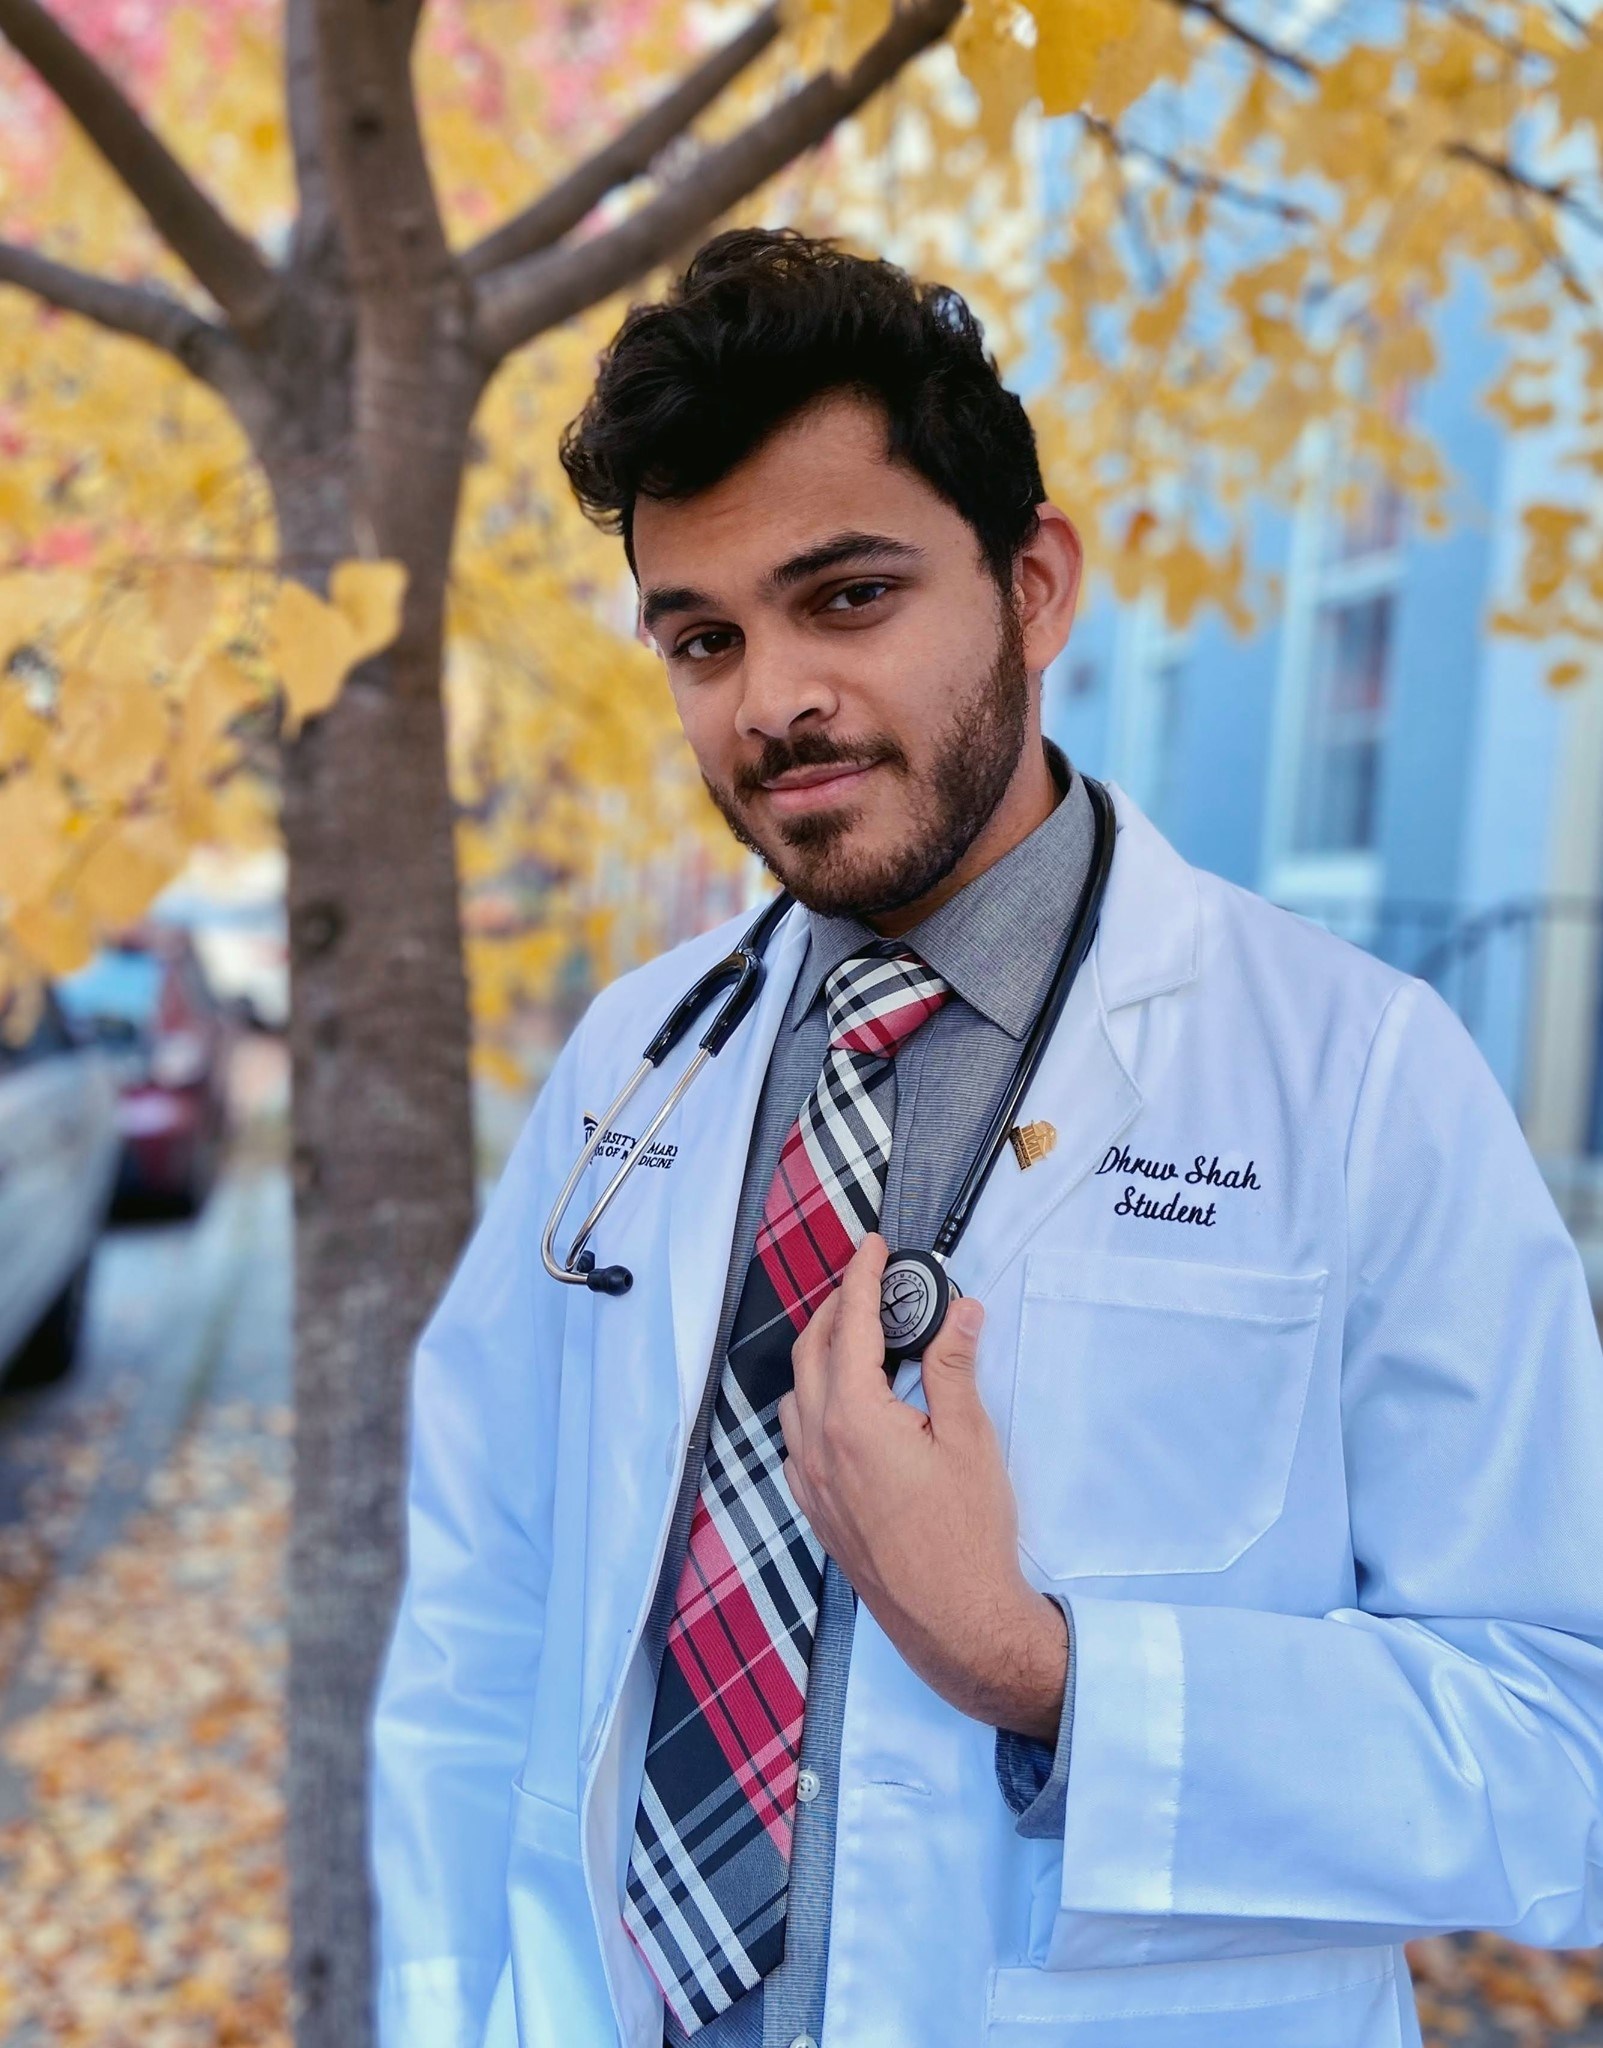 Photo of student wearing a medical jacket with a tree in the background